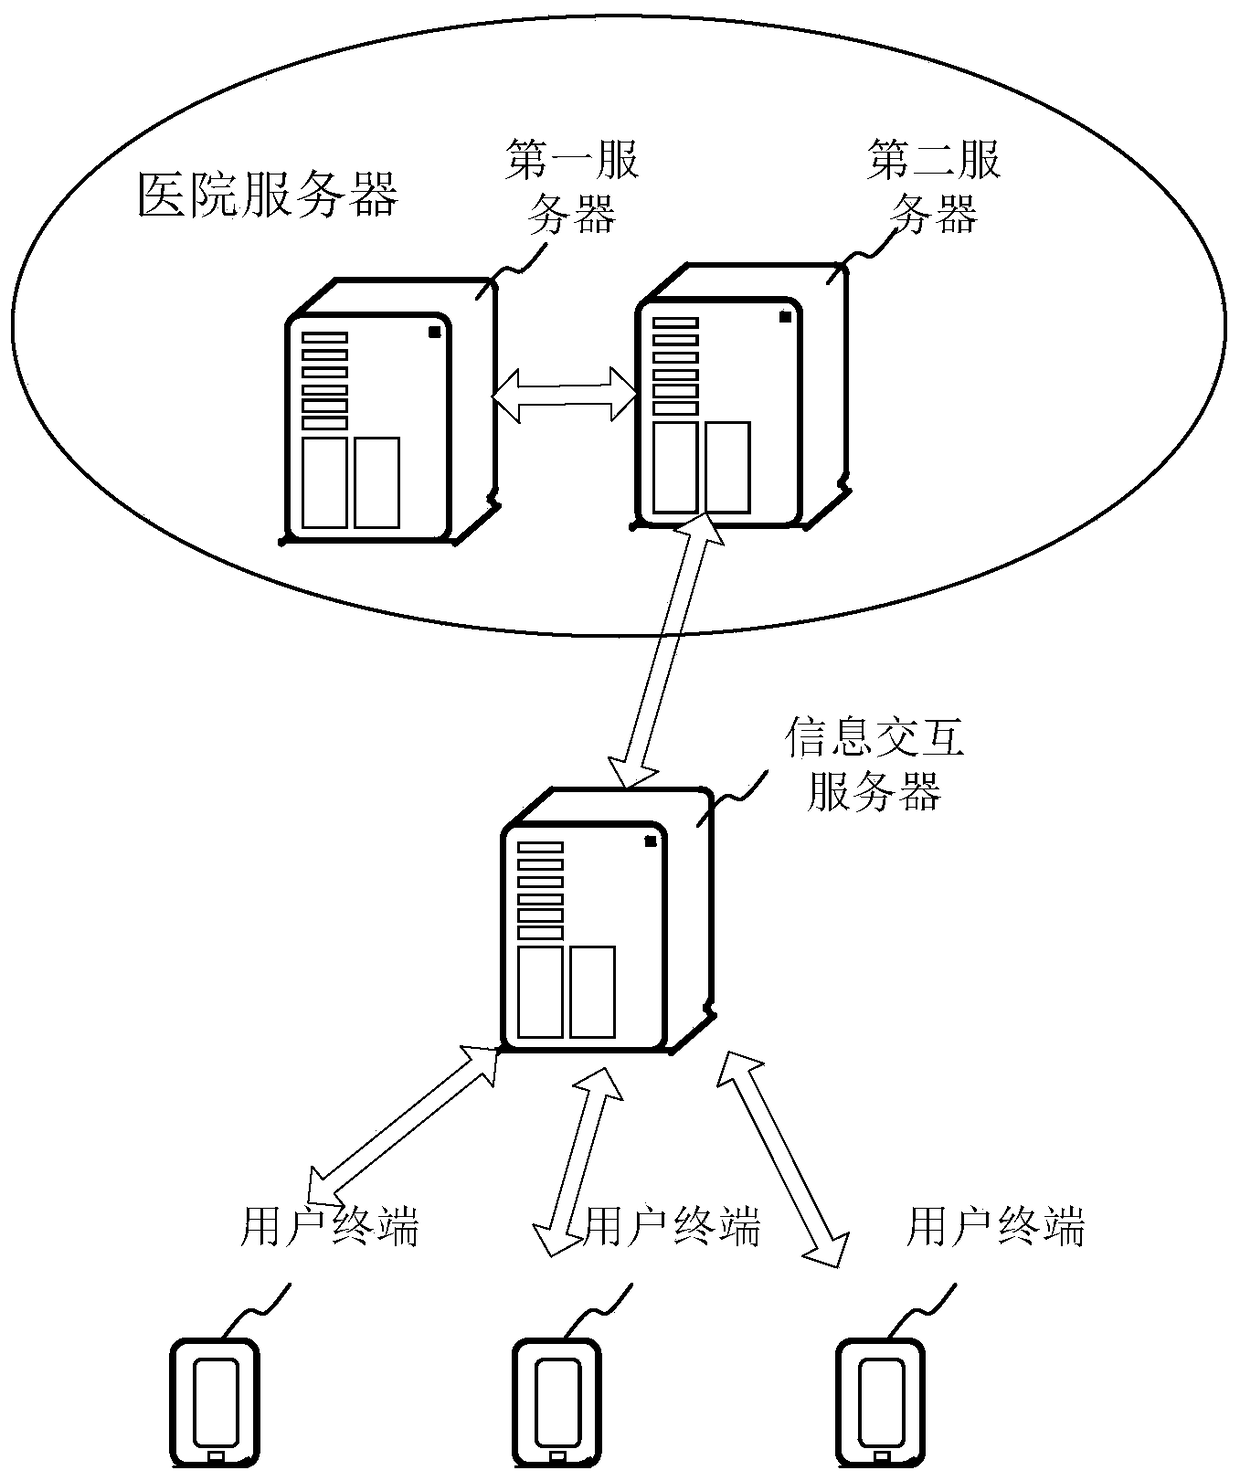 Information interaction system, method and device